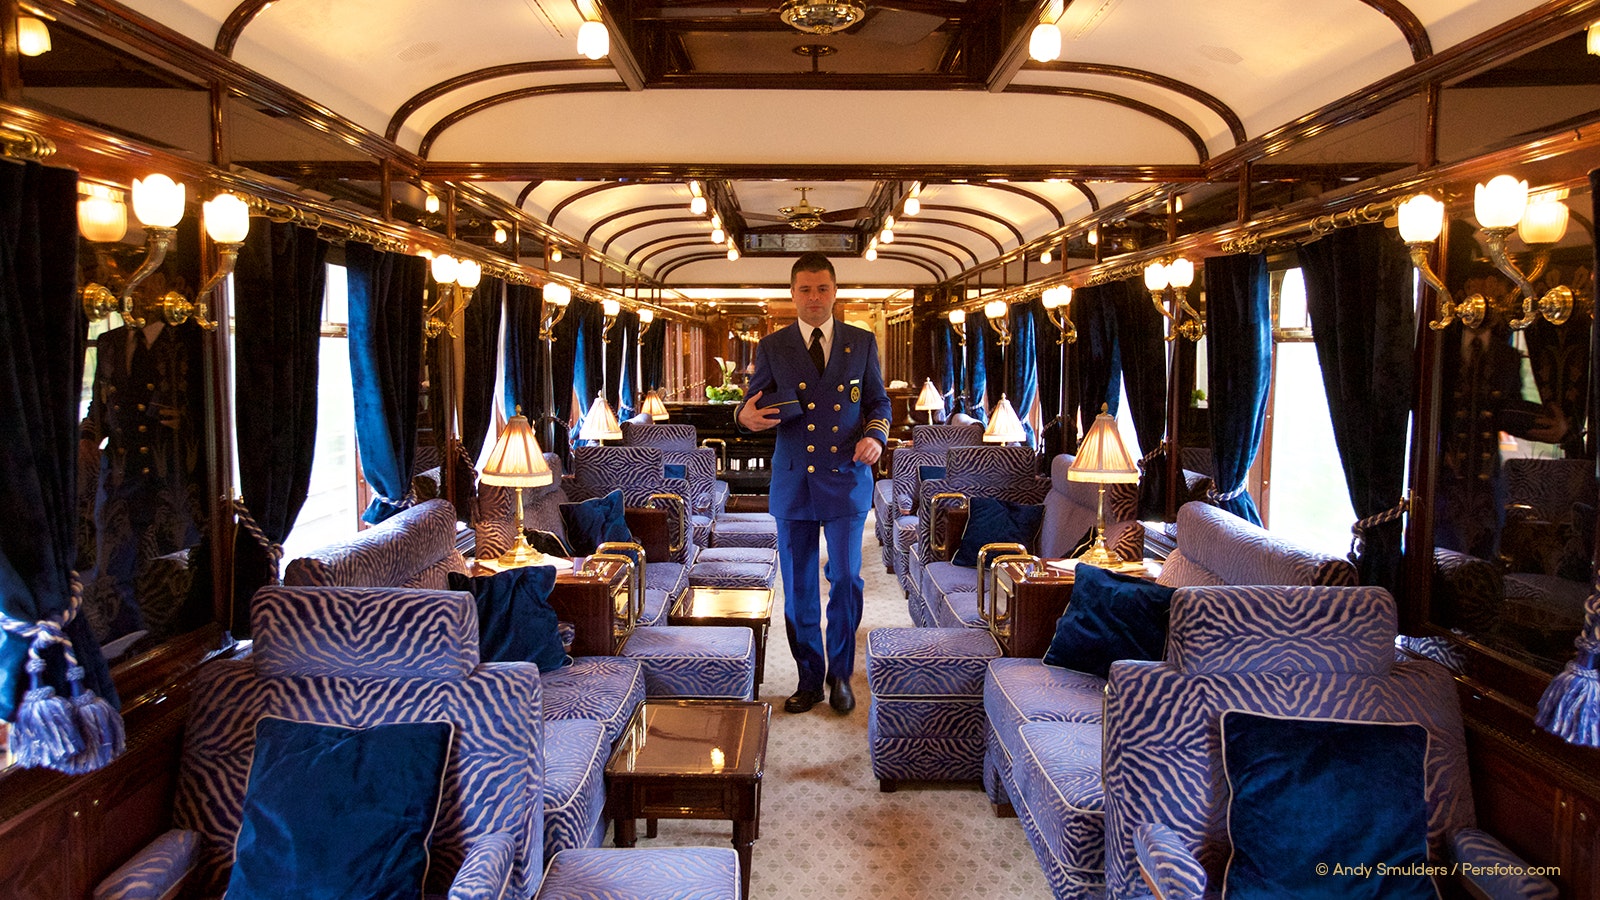 The Venice Simplon-Orient-Express Is Taking Reservations For Its New B